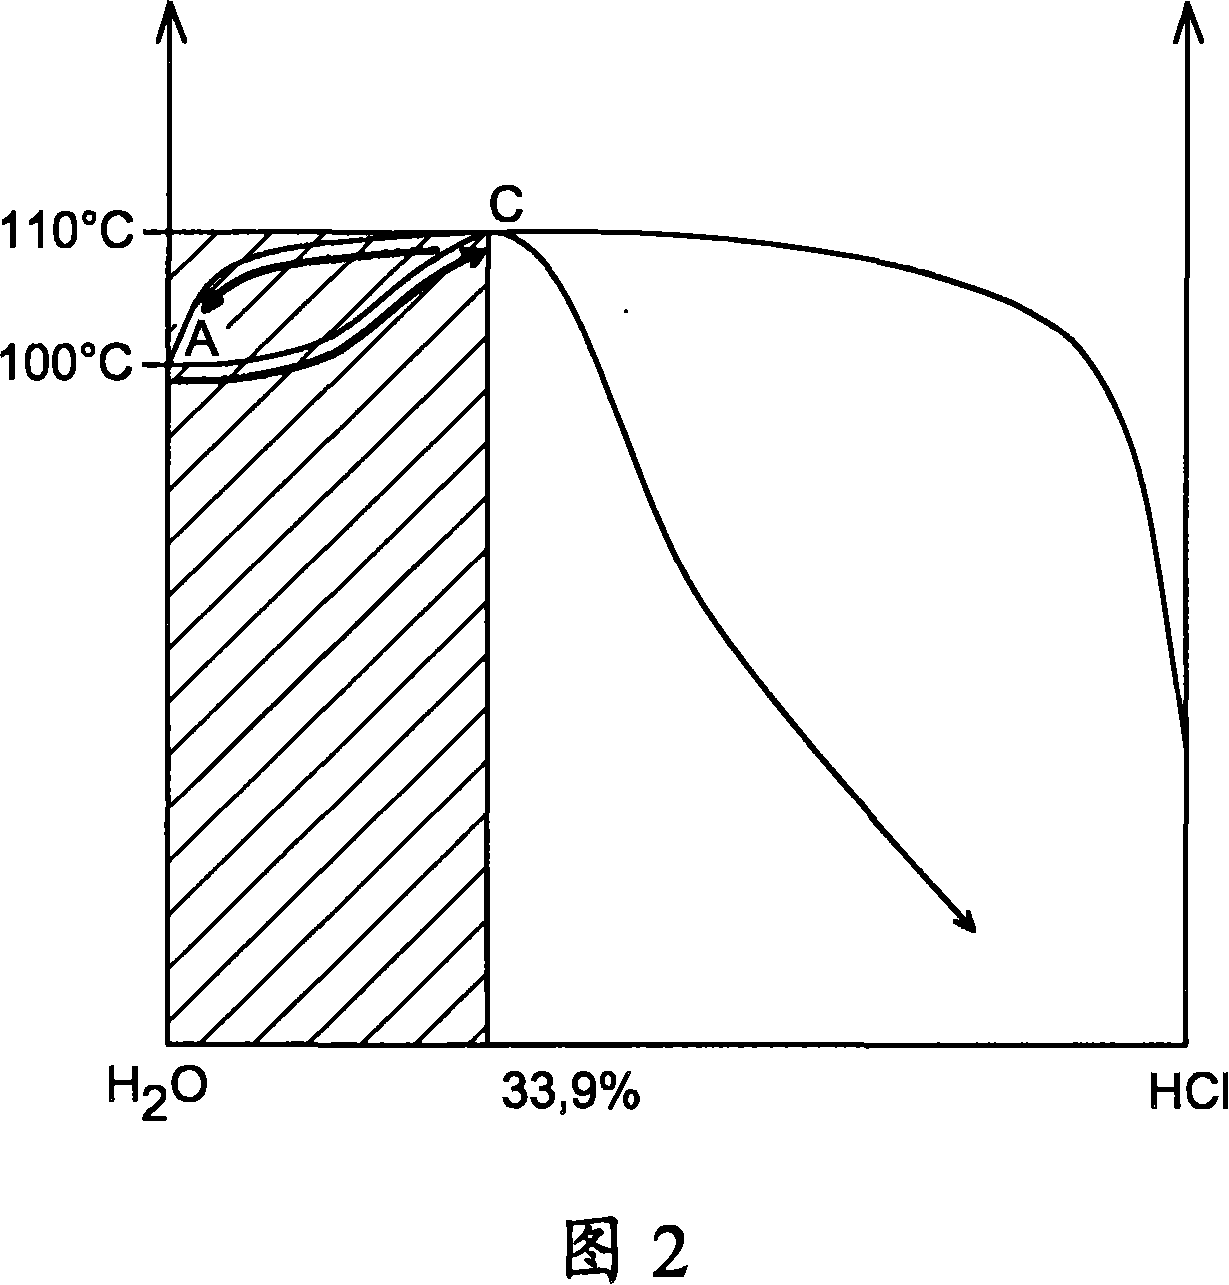 Method for producing hydrogen by thermochemical process based on hydrochlorination of cerium